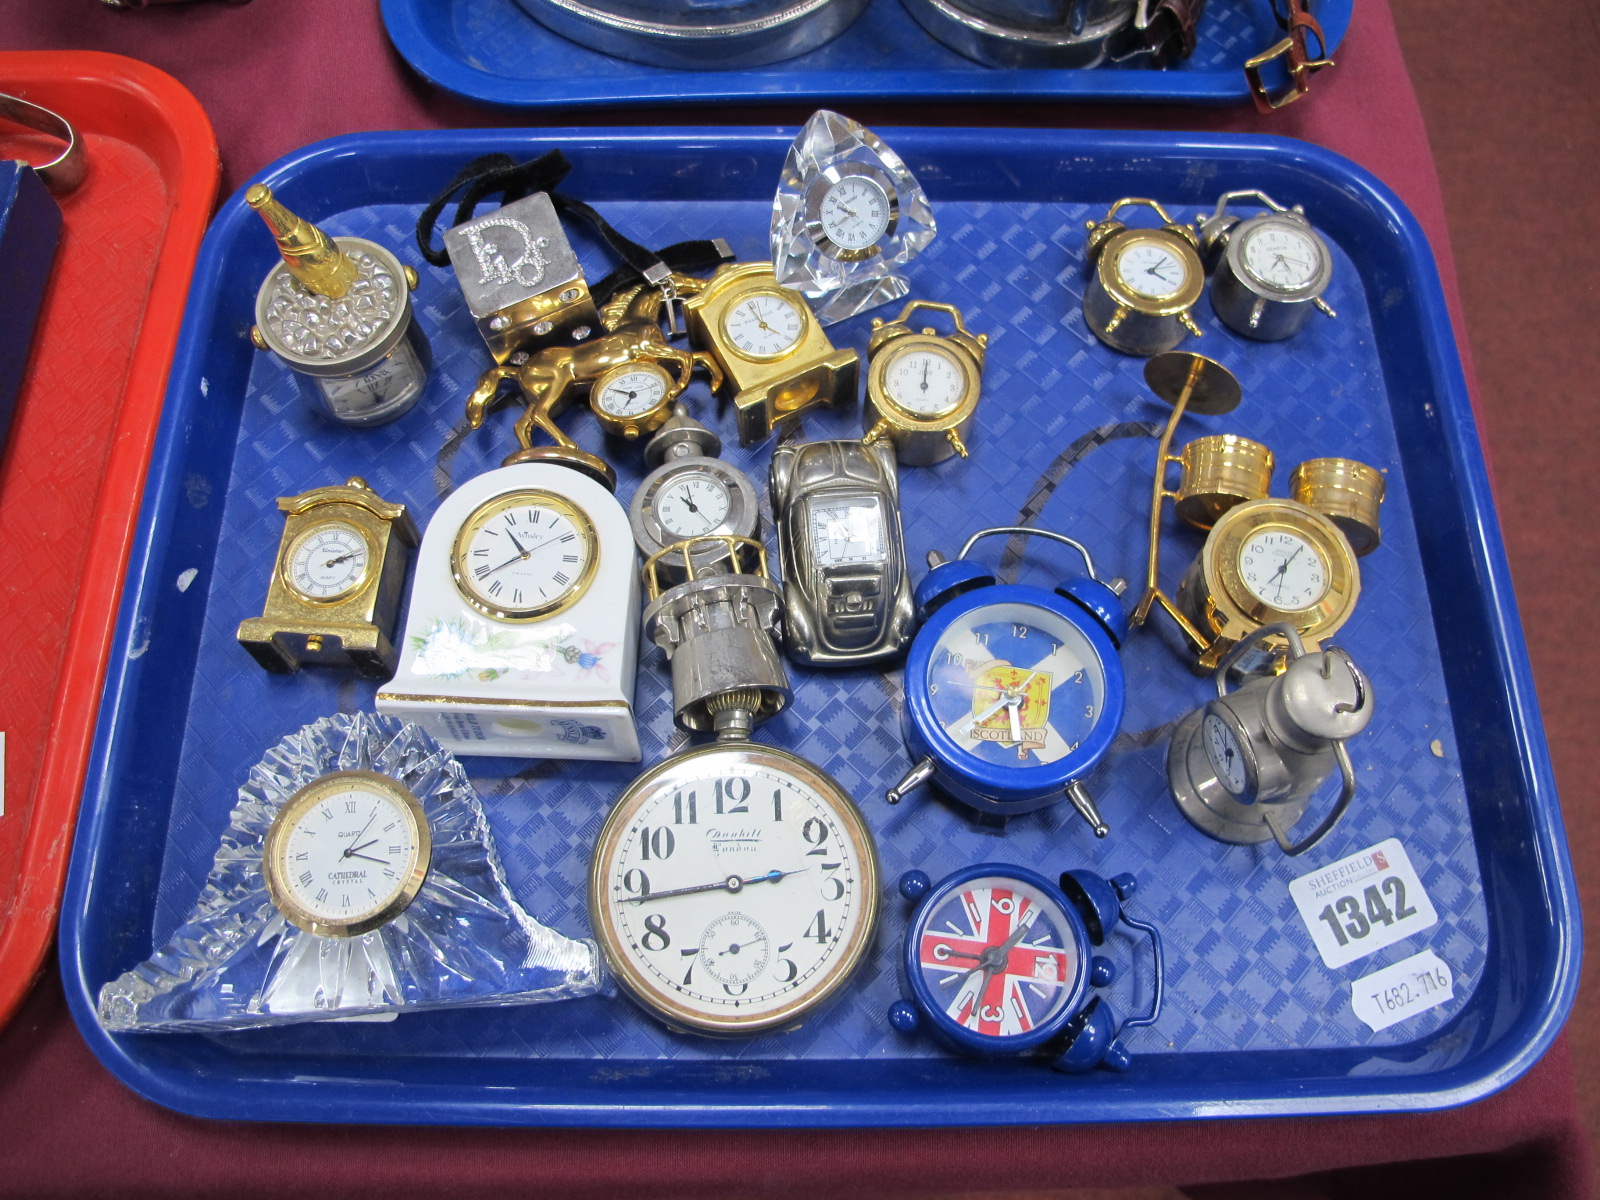 Connhill Pocket Watch, mini clocks, Cathedral crystal clock, etc:- One Tray.